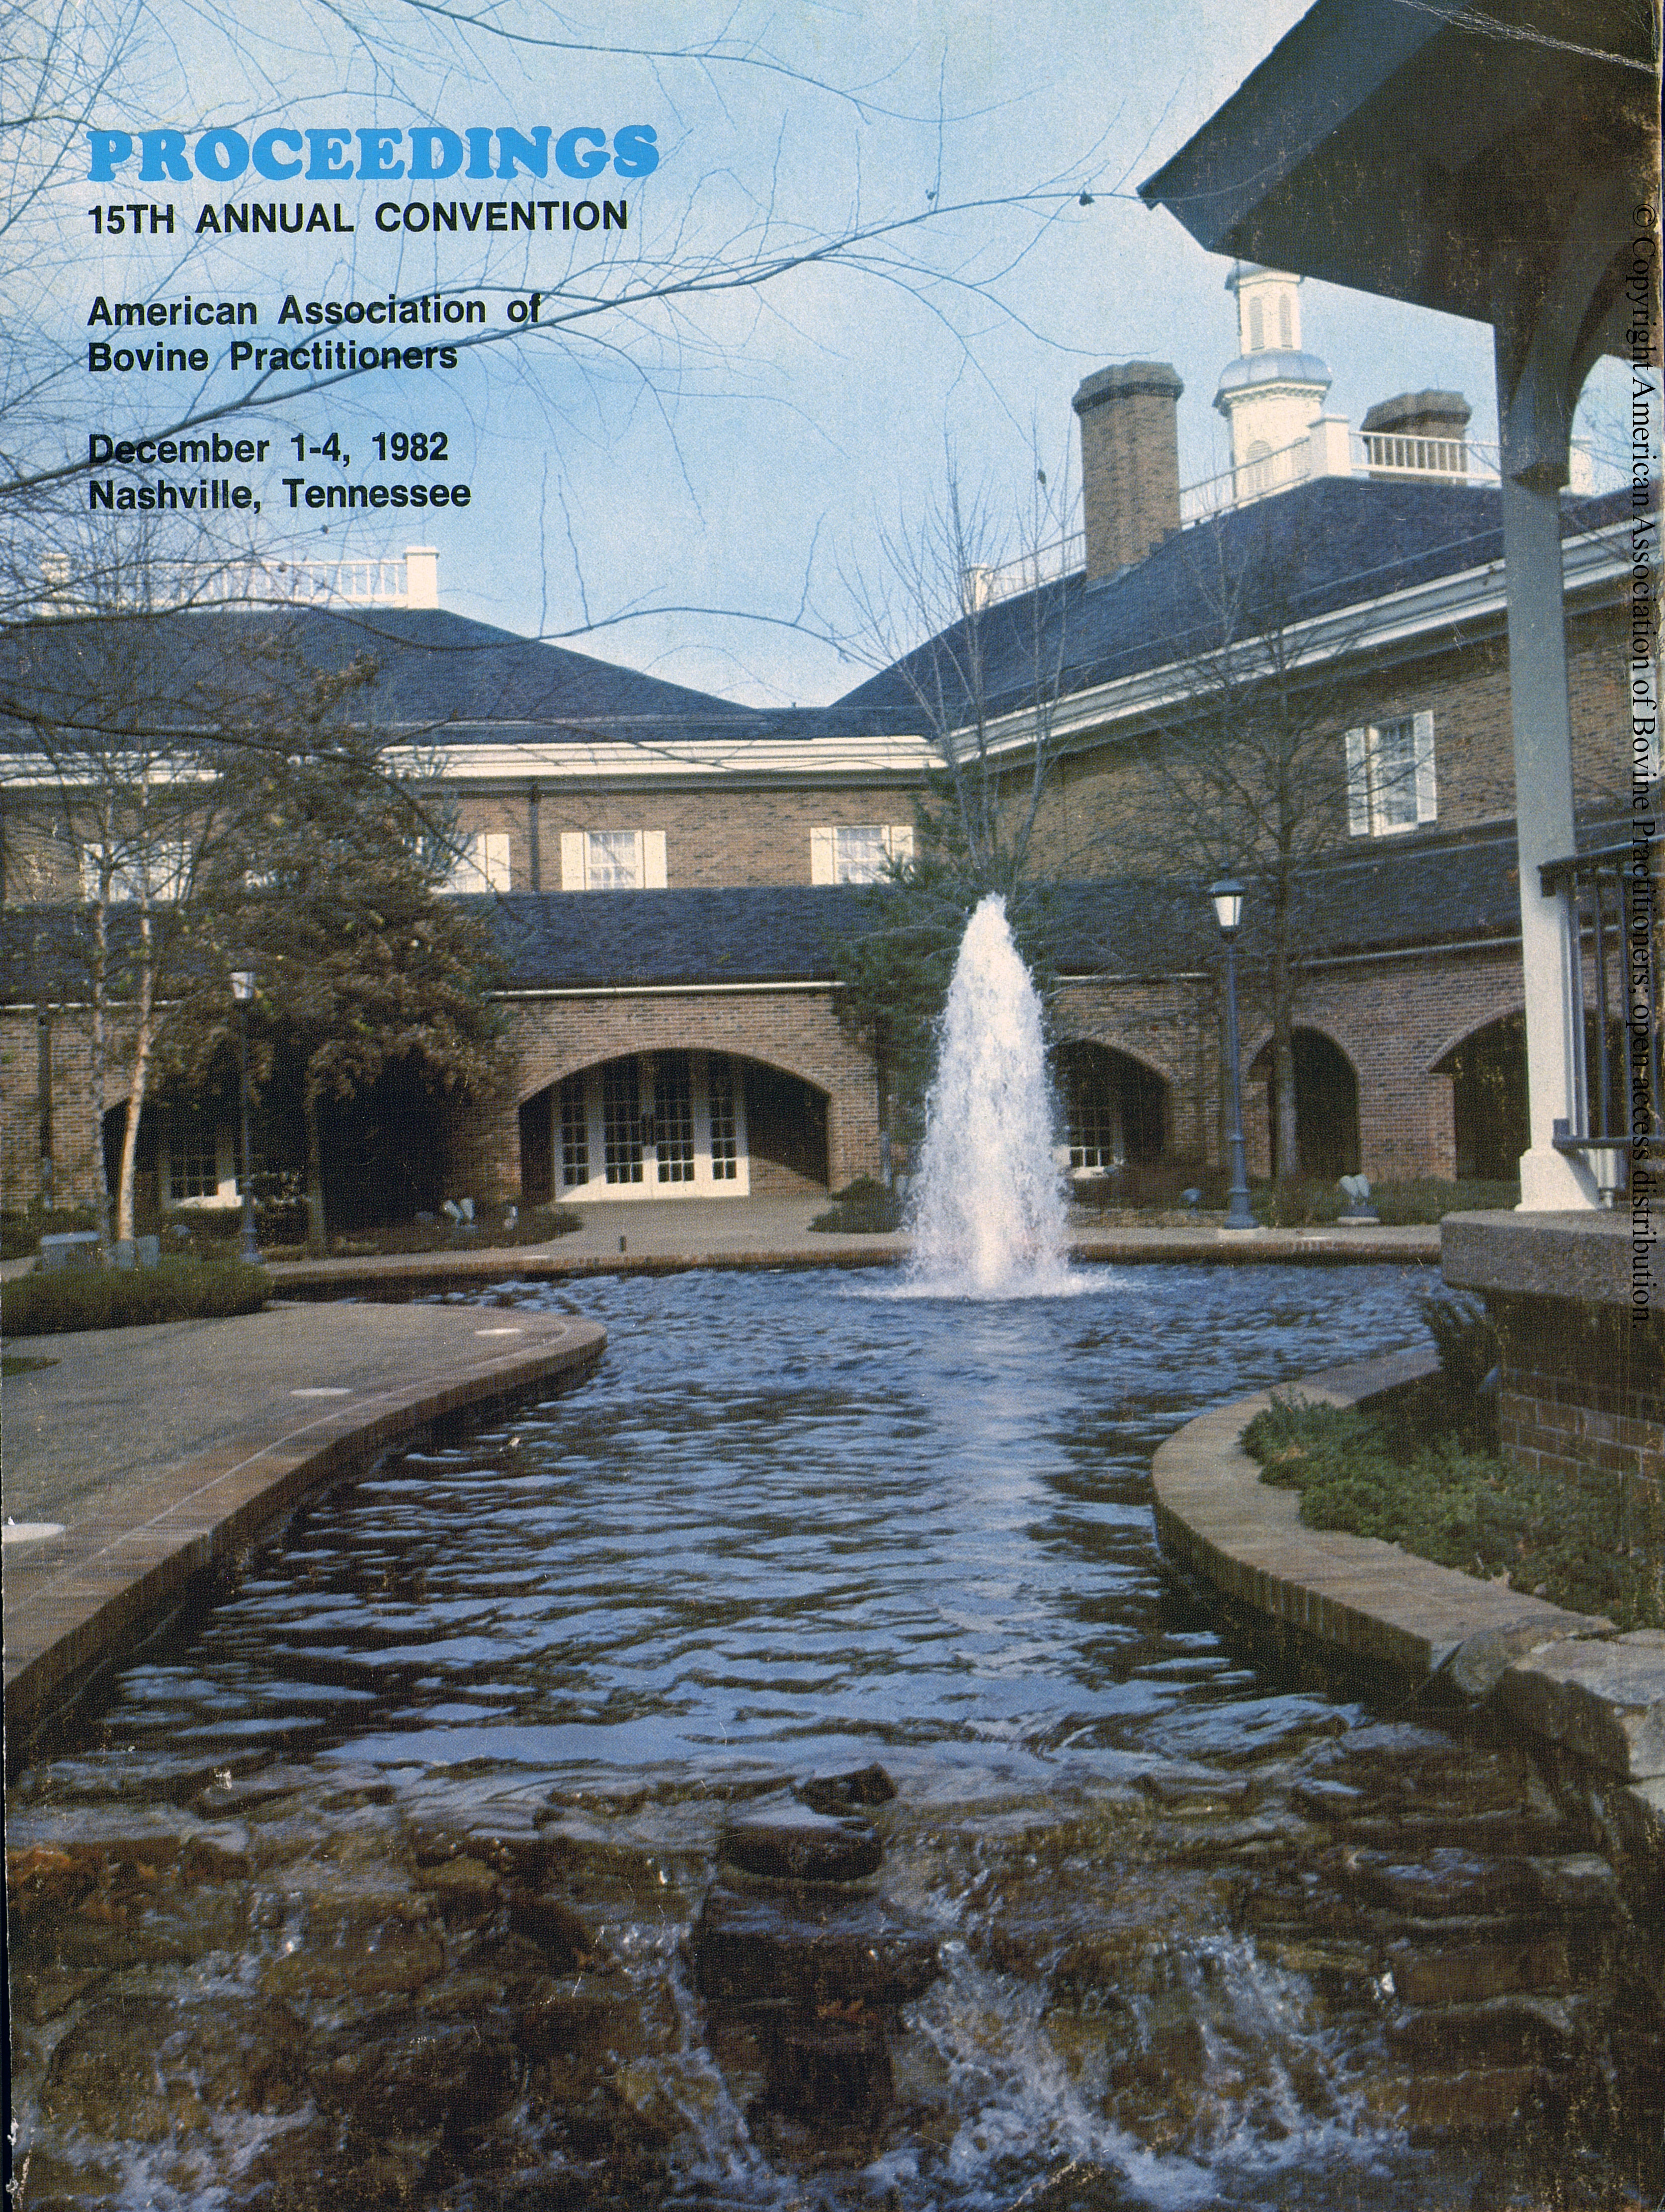 Cover image of the Proceedings of the 15th Annual Convention: Cover image is a photo of a outdoor plaza at the Opryland Hotel with a fountain and river rocks, the journal title and conference information is written in the upper left hand corner.